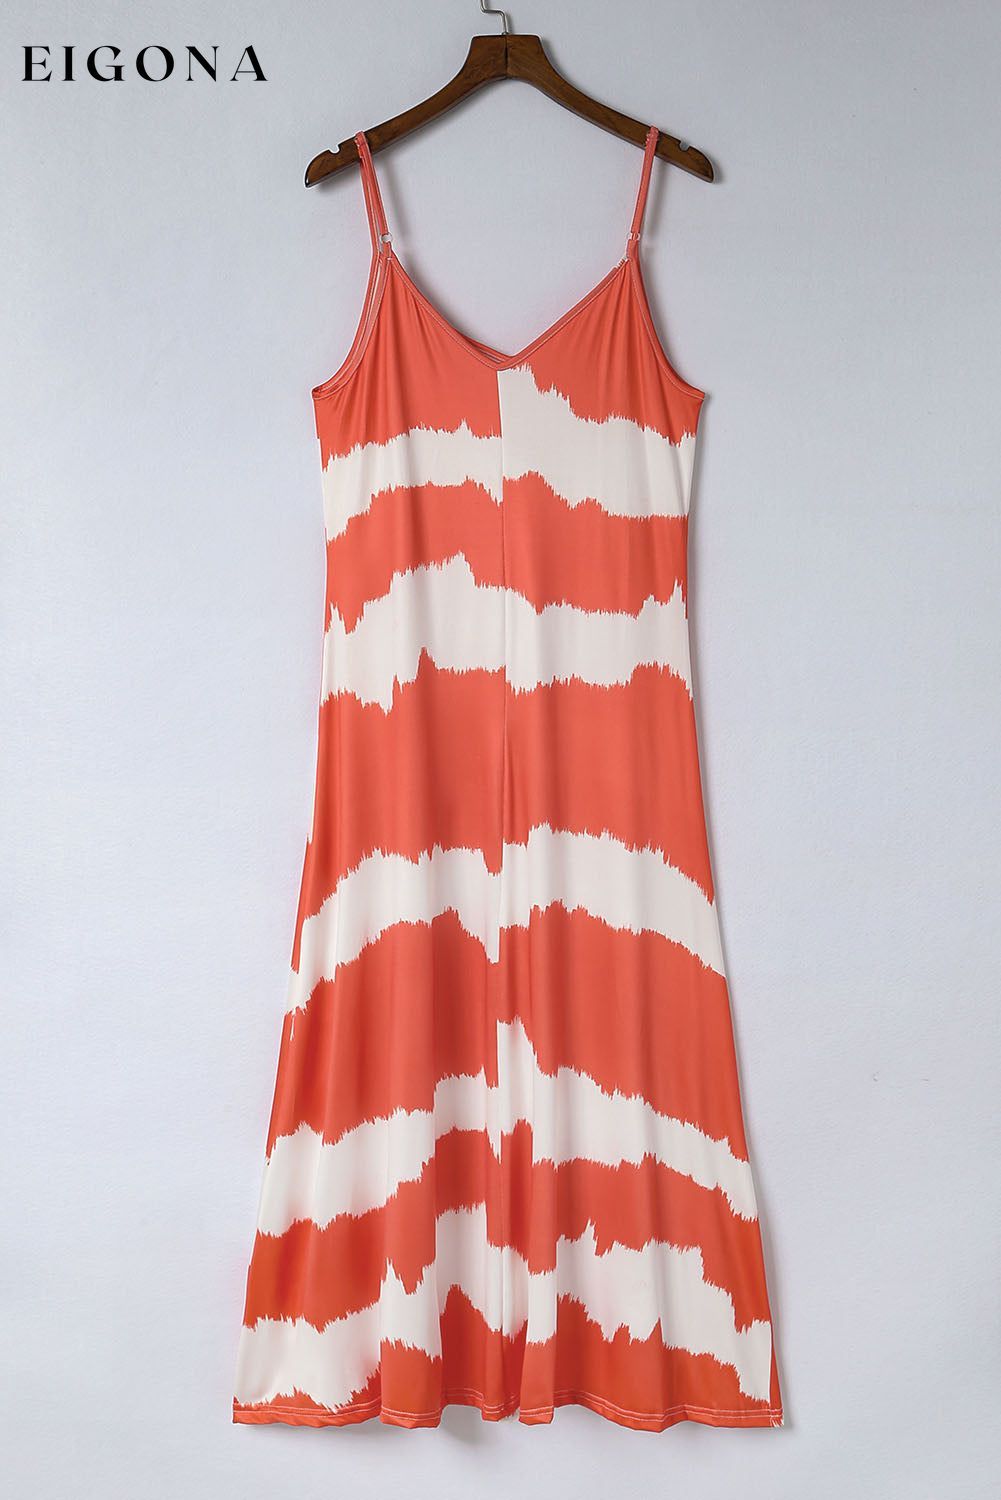 Orange Tie Dye Striped Spaghetti Straps Maxi Dress clothes Craft Tie Dye DL Mediterranean dress dresses Occasion Vacation Print Color Block Season Summer Size S To 2XL Sleeve Sleeveless Style Casual